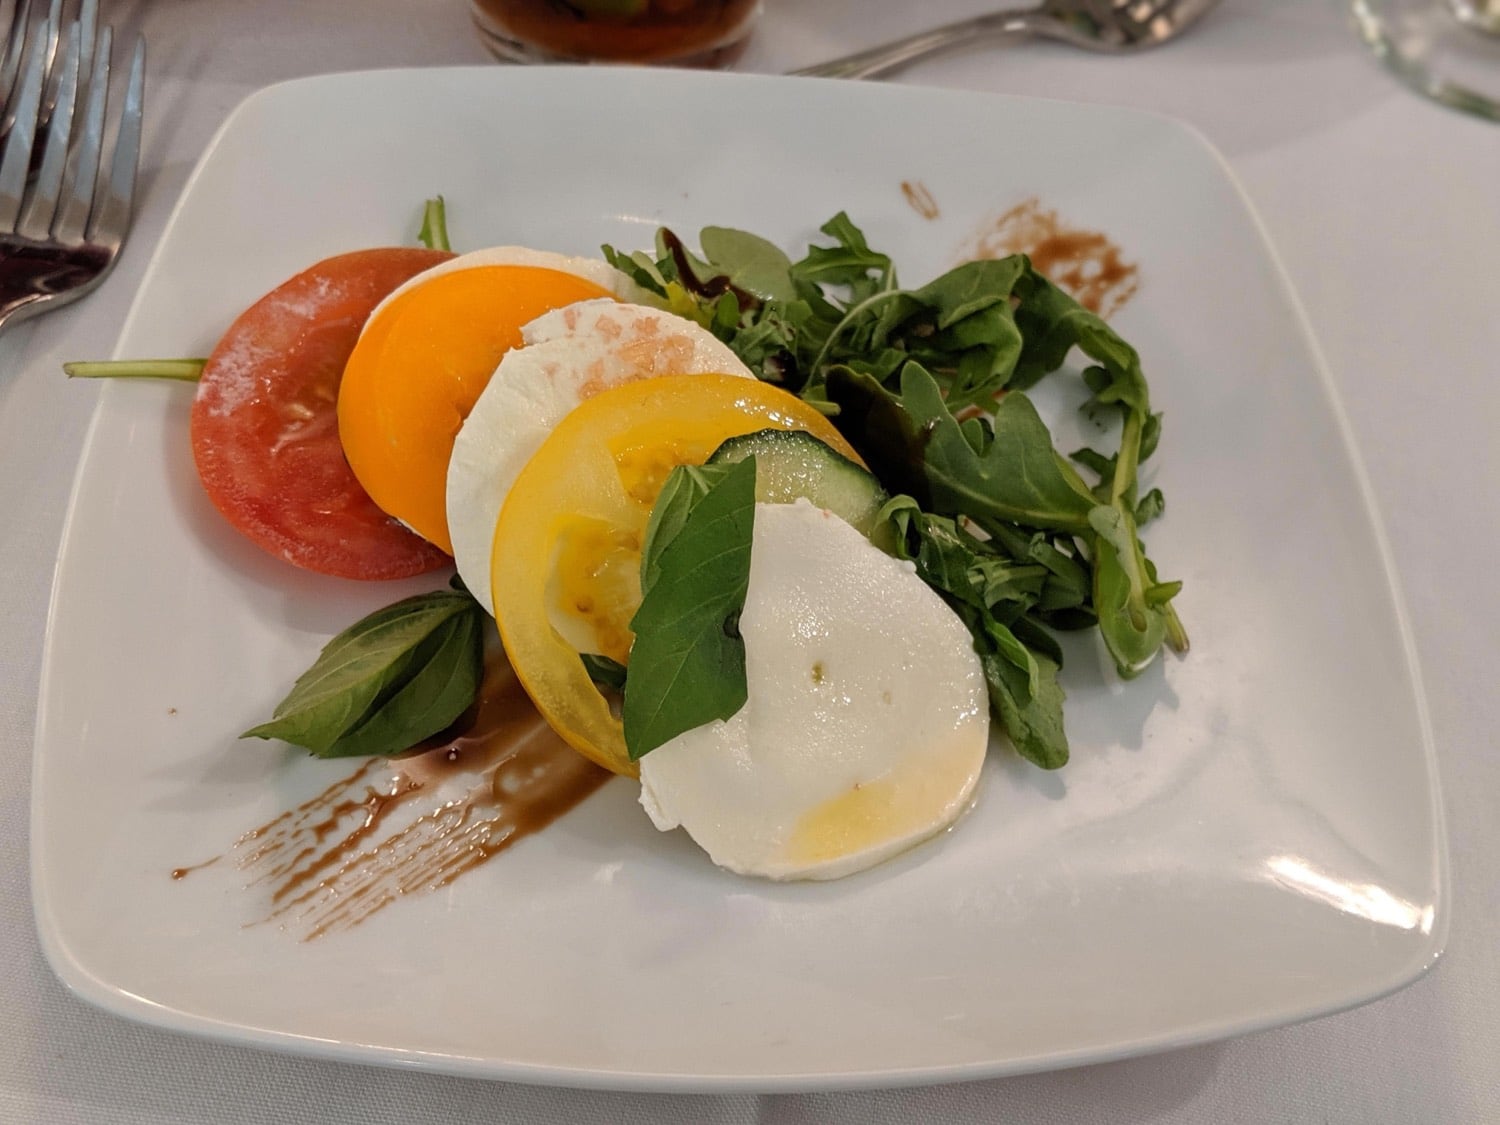 Plated salad as part of a wedding meal